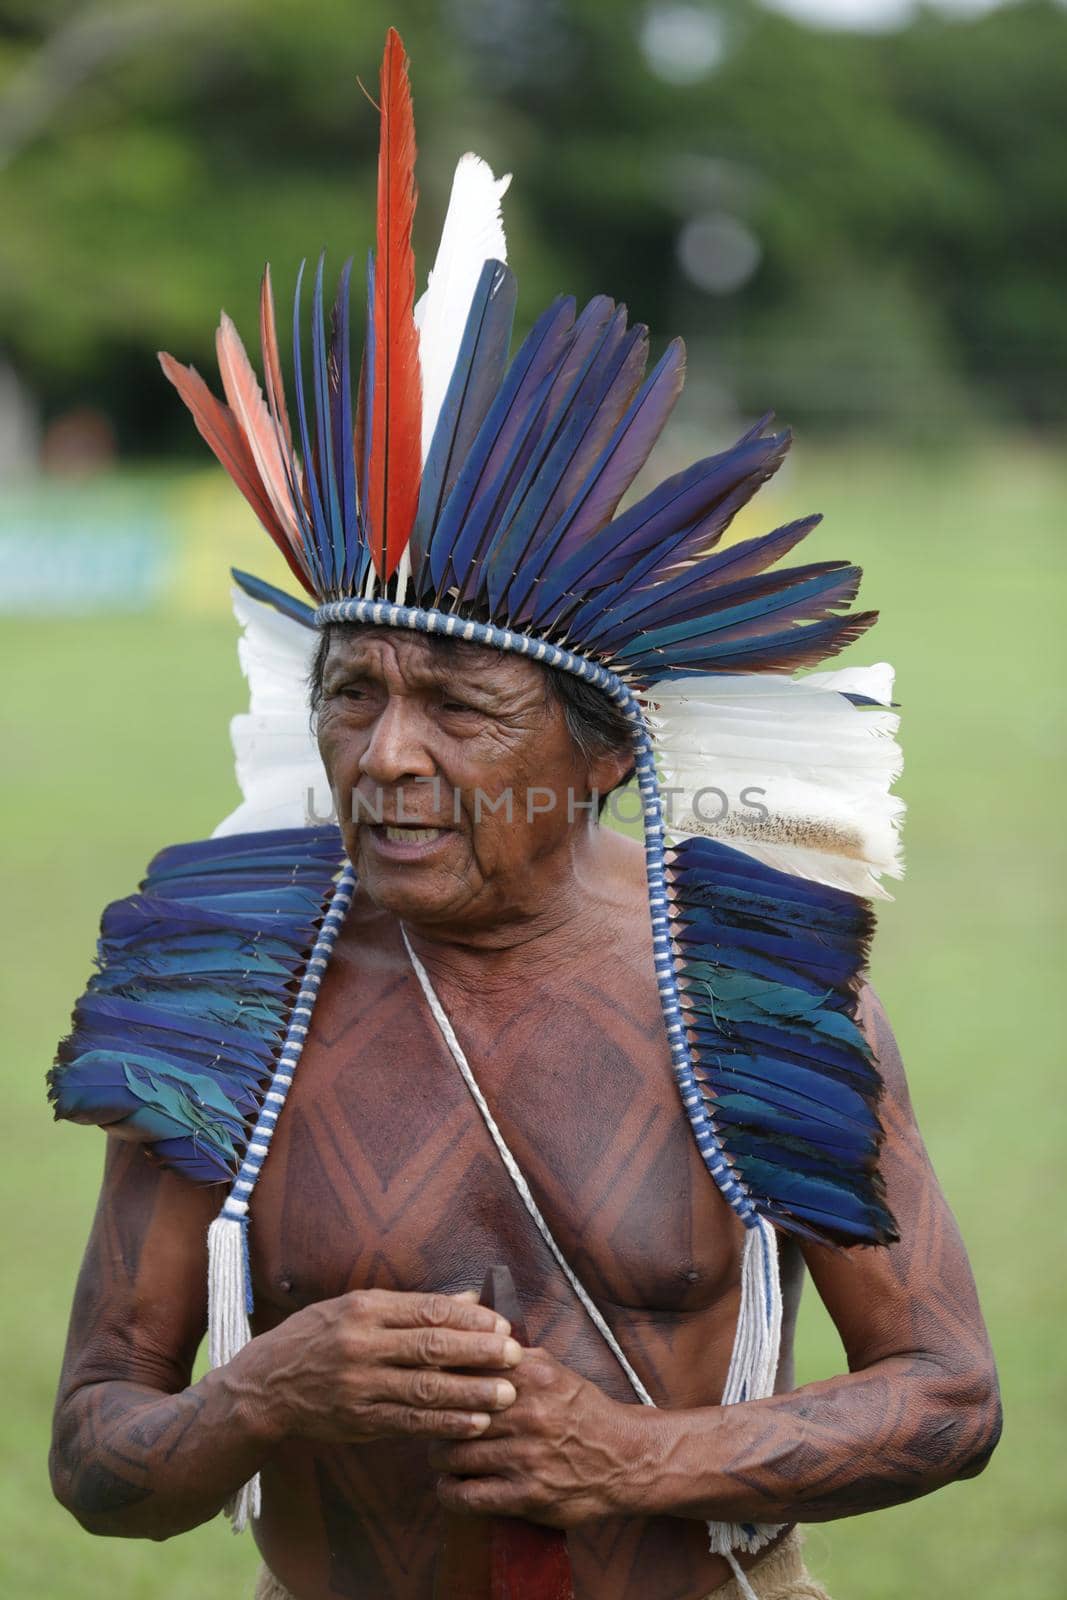 salvador, bahia / brazil - May 7, 2019: Indigenous of Bahia tribe are seen during to debate political conjuncture and demand demarcation of indigenous lands. 